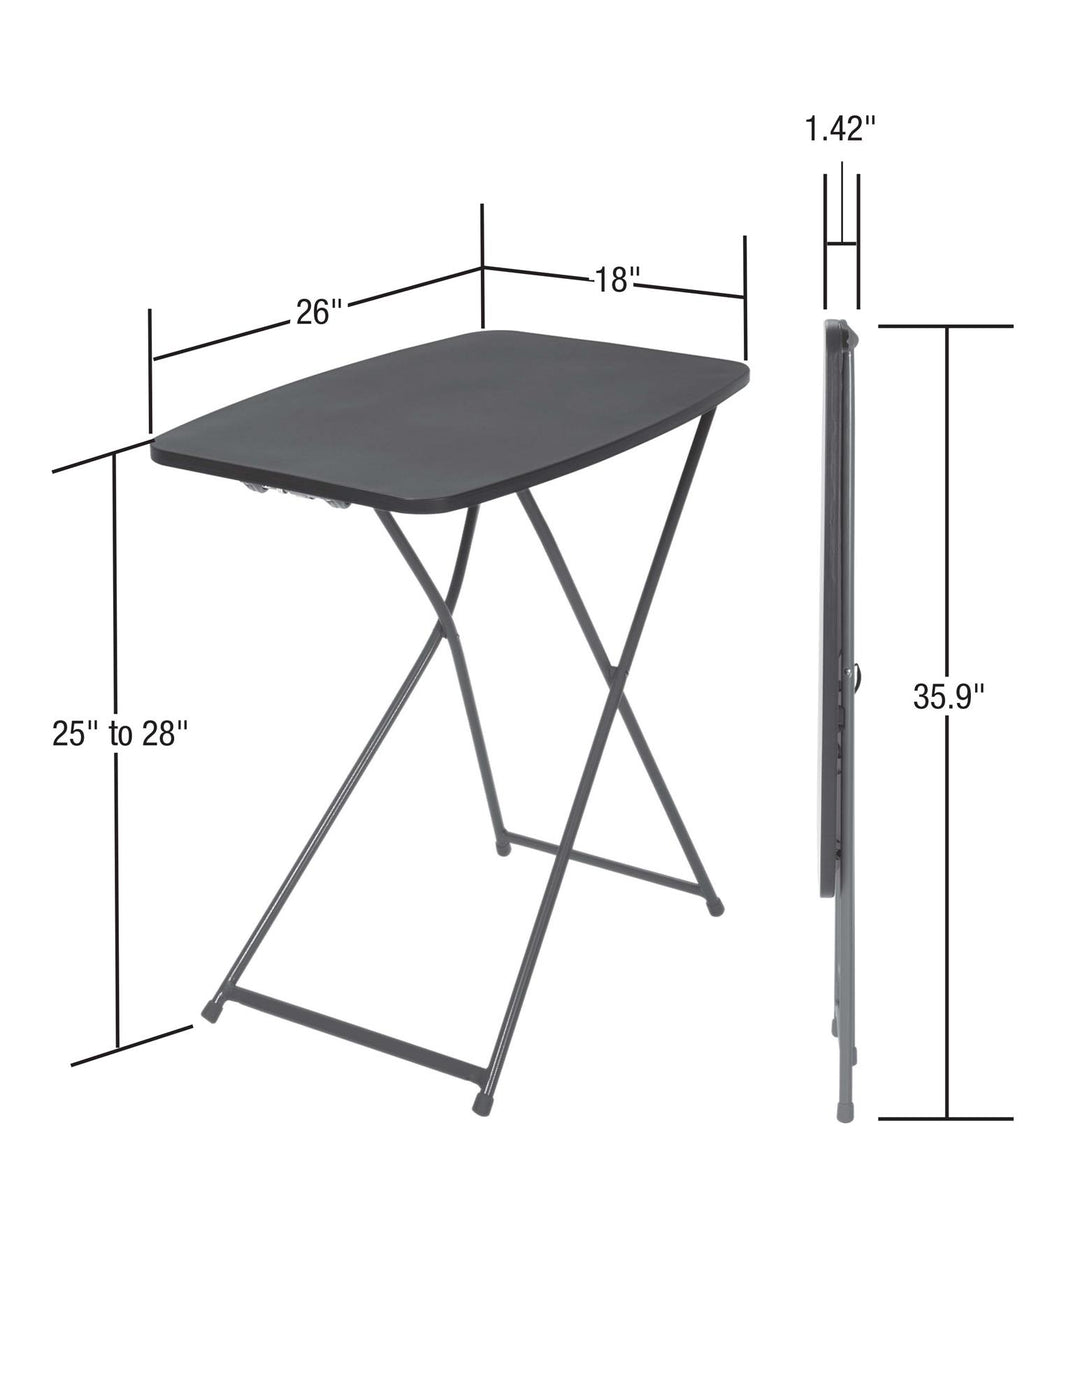 Personal Folding Activity Tables 2-Pack -  Black 